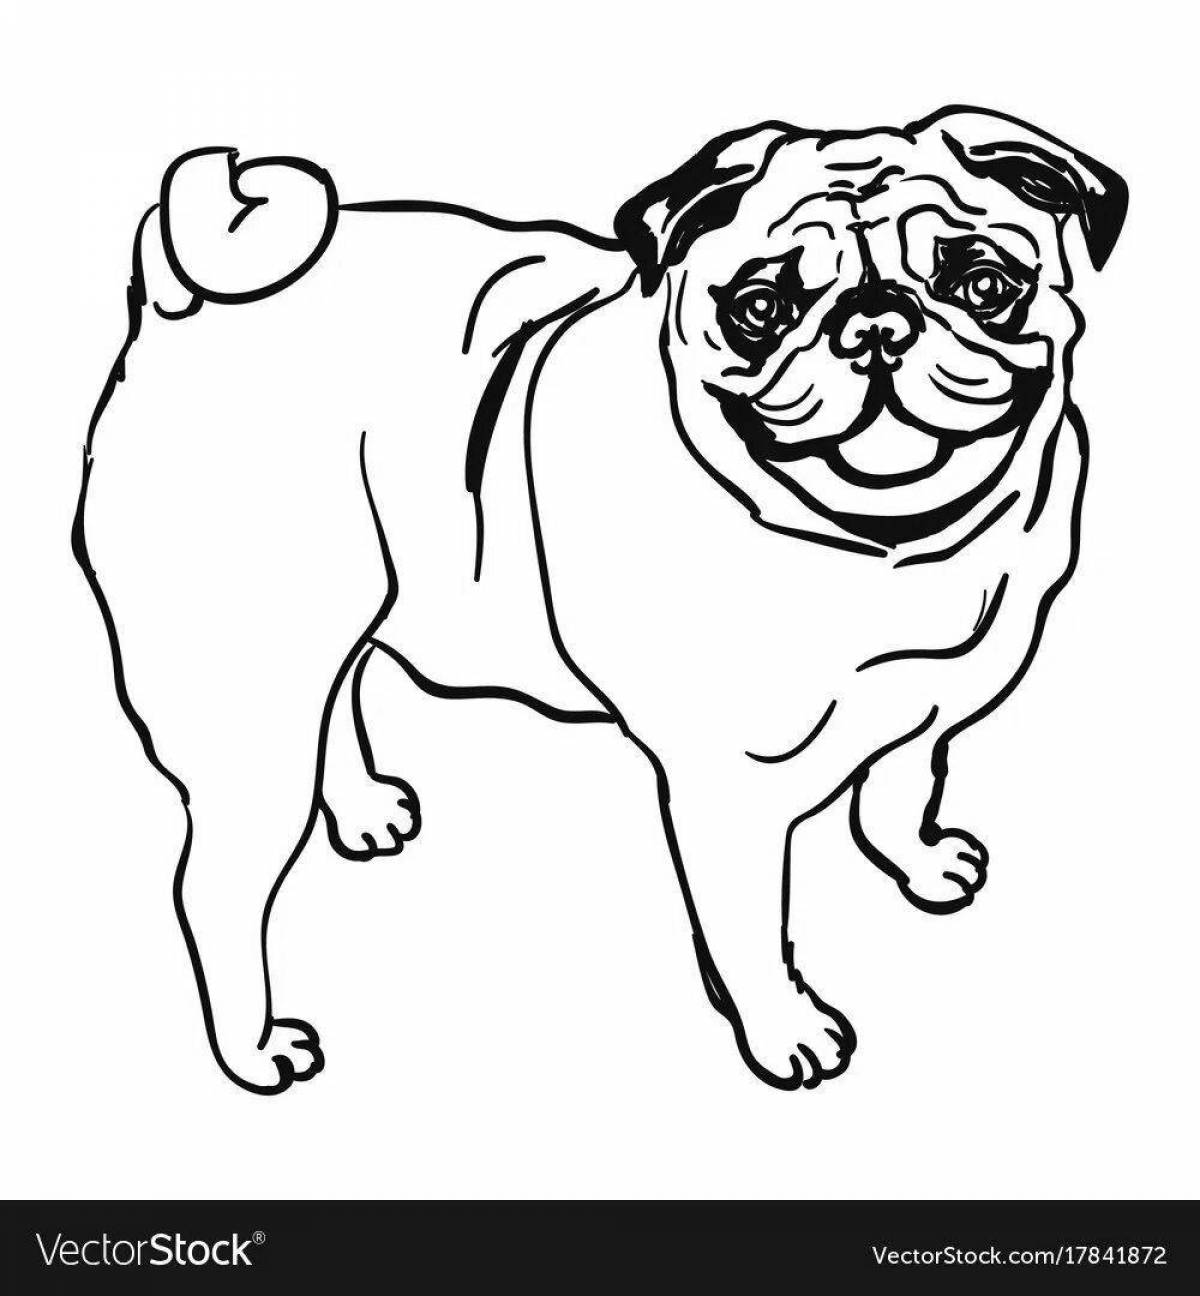 Coloring page playful pug